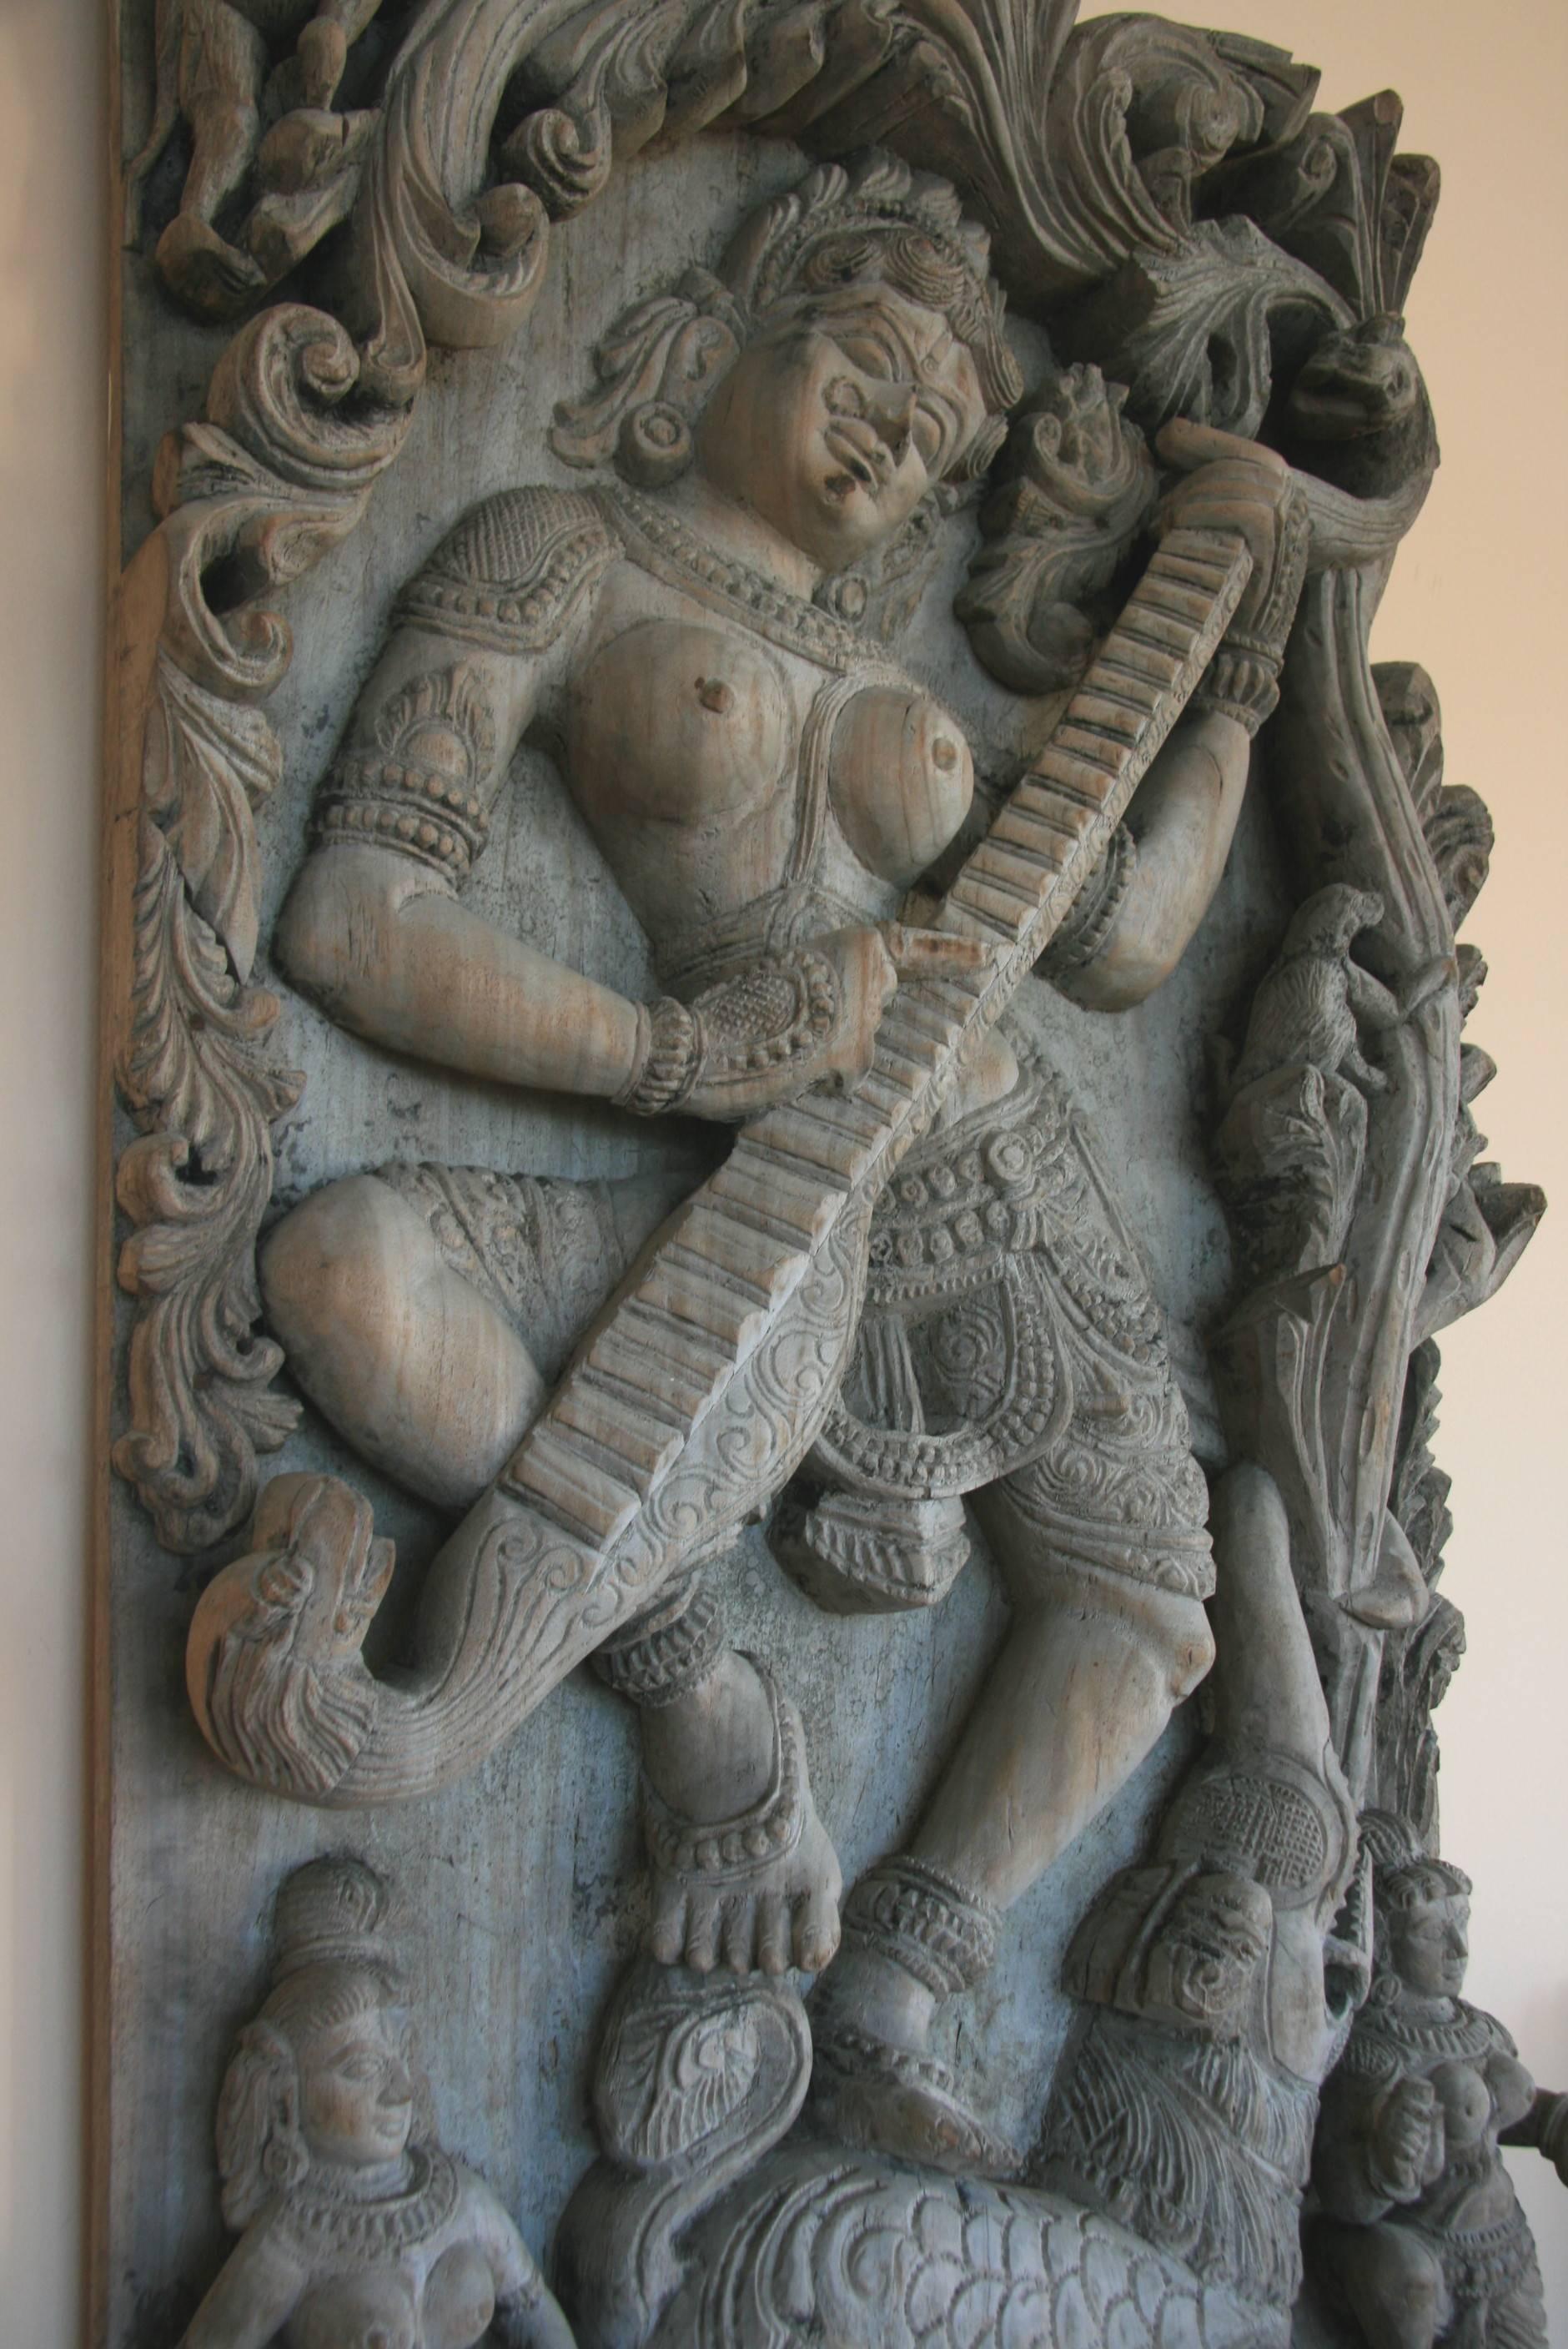 5-579 Skillfully carved figure of Lord Krishna wall carving
Originally part of an Indian temple
